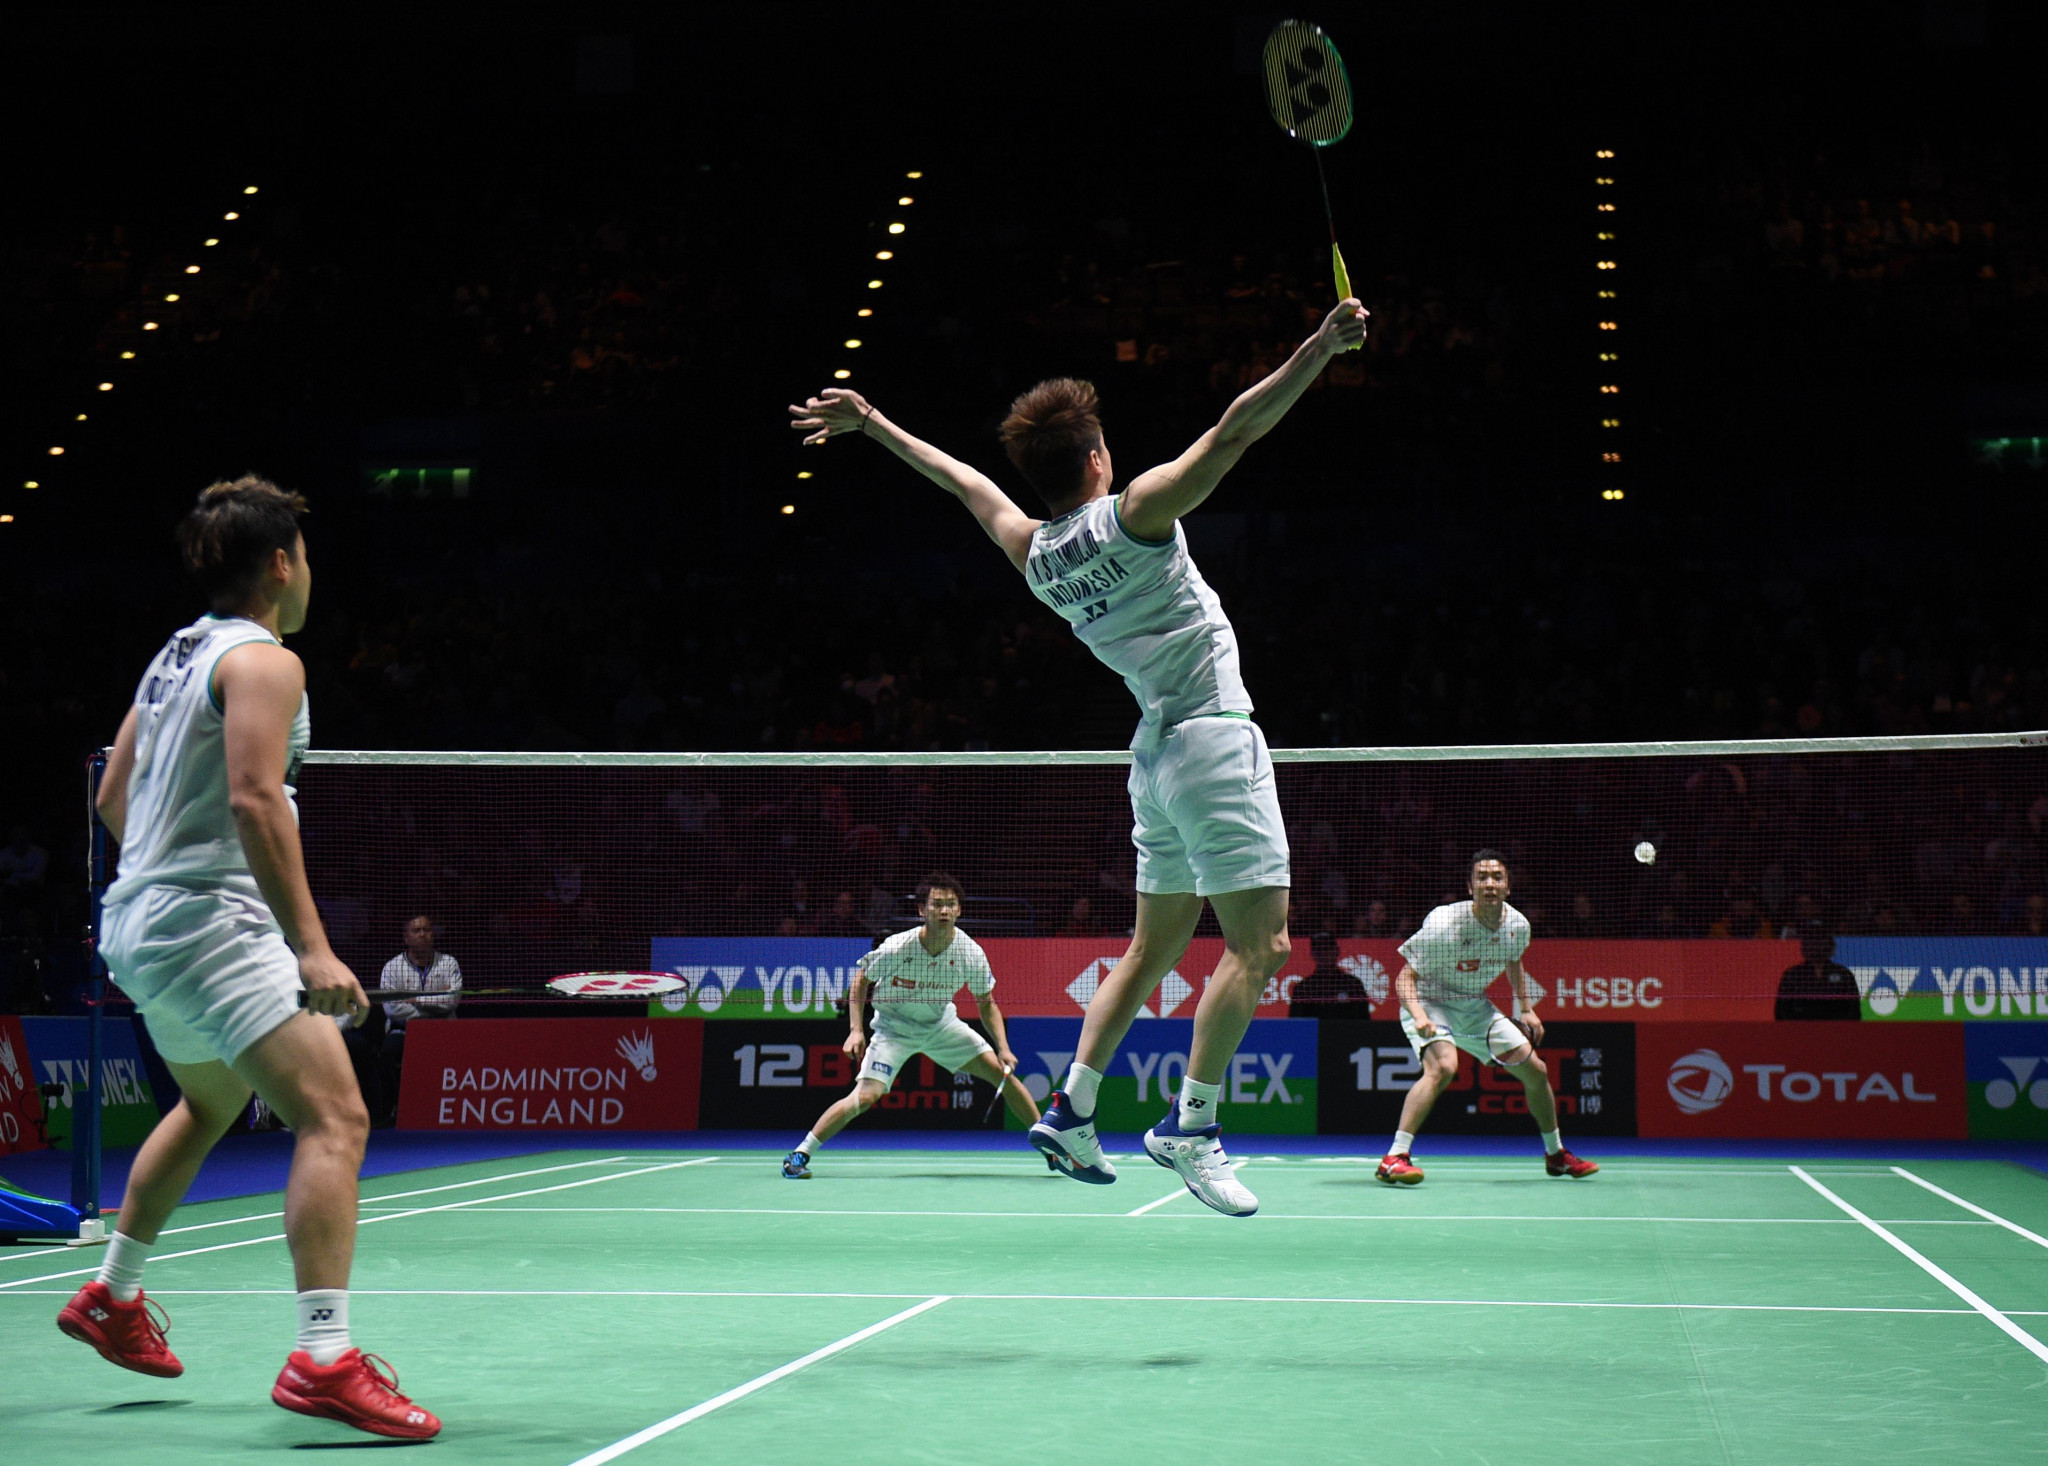 Badminton Events Cheaper Than Retail Price Buy Clothing Accessories And Lifestyle Products For